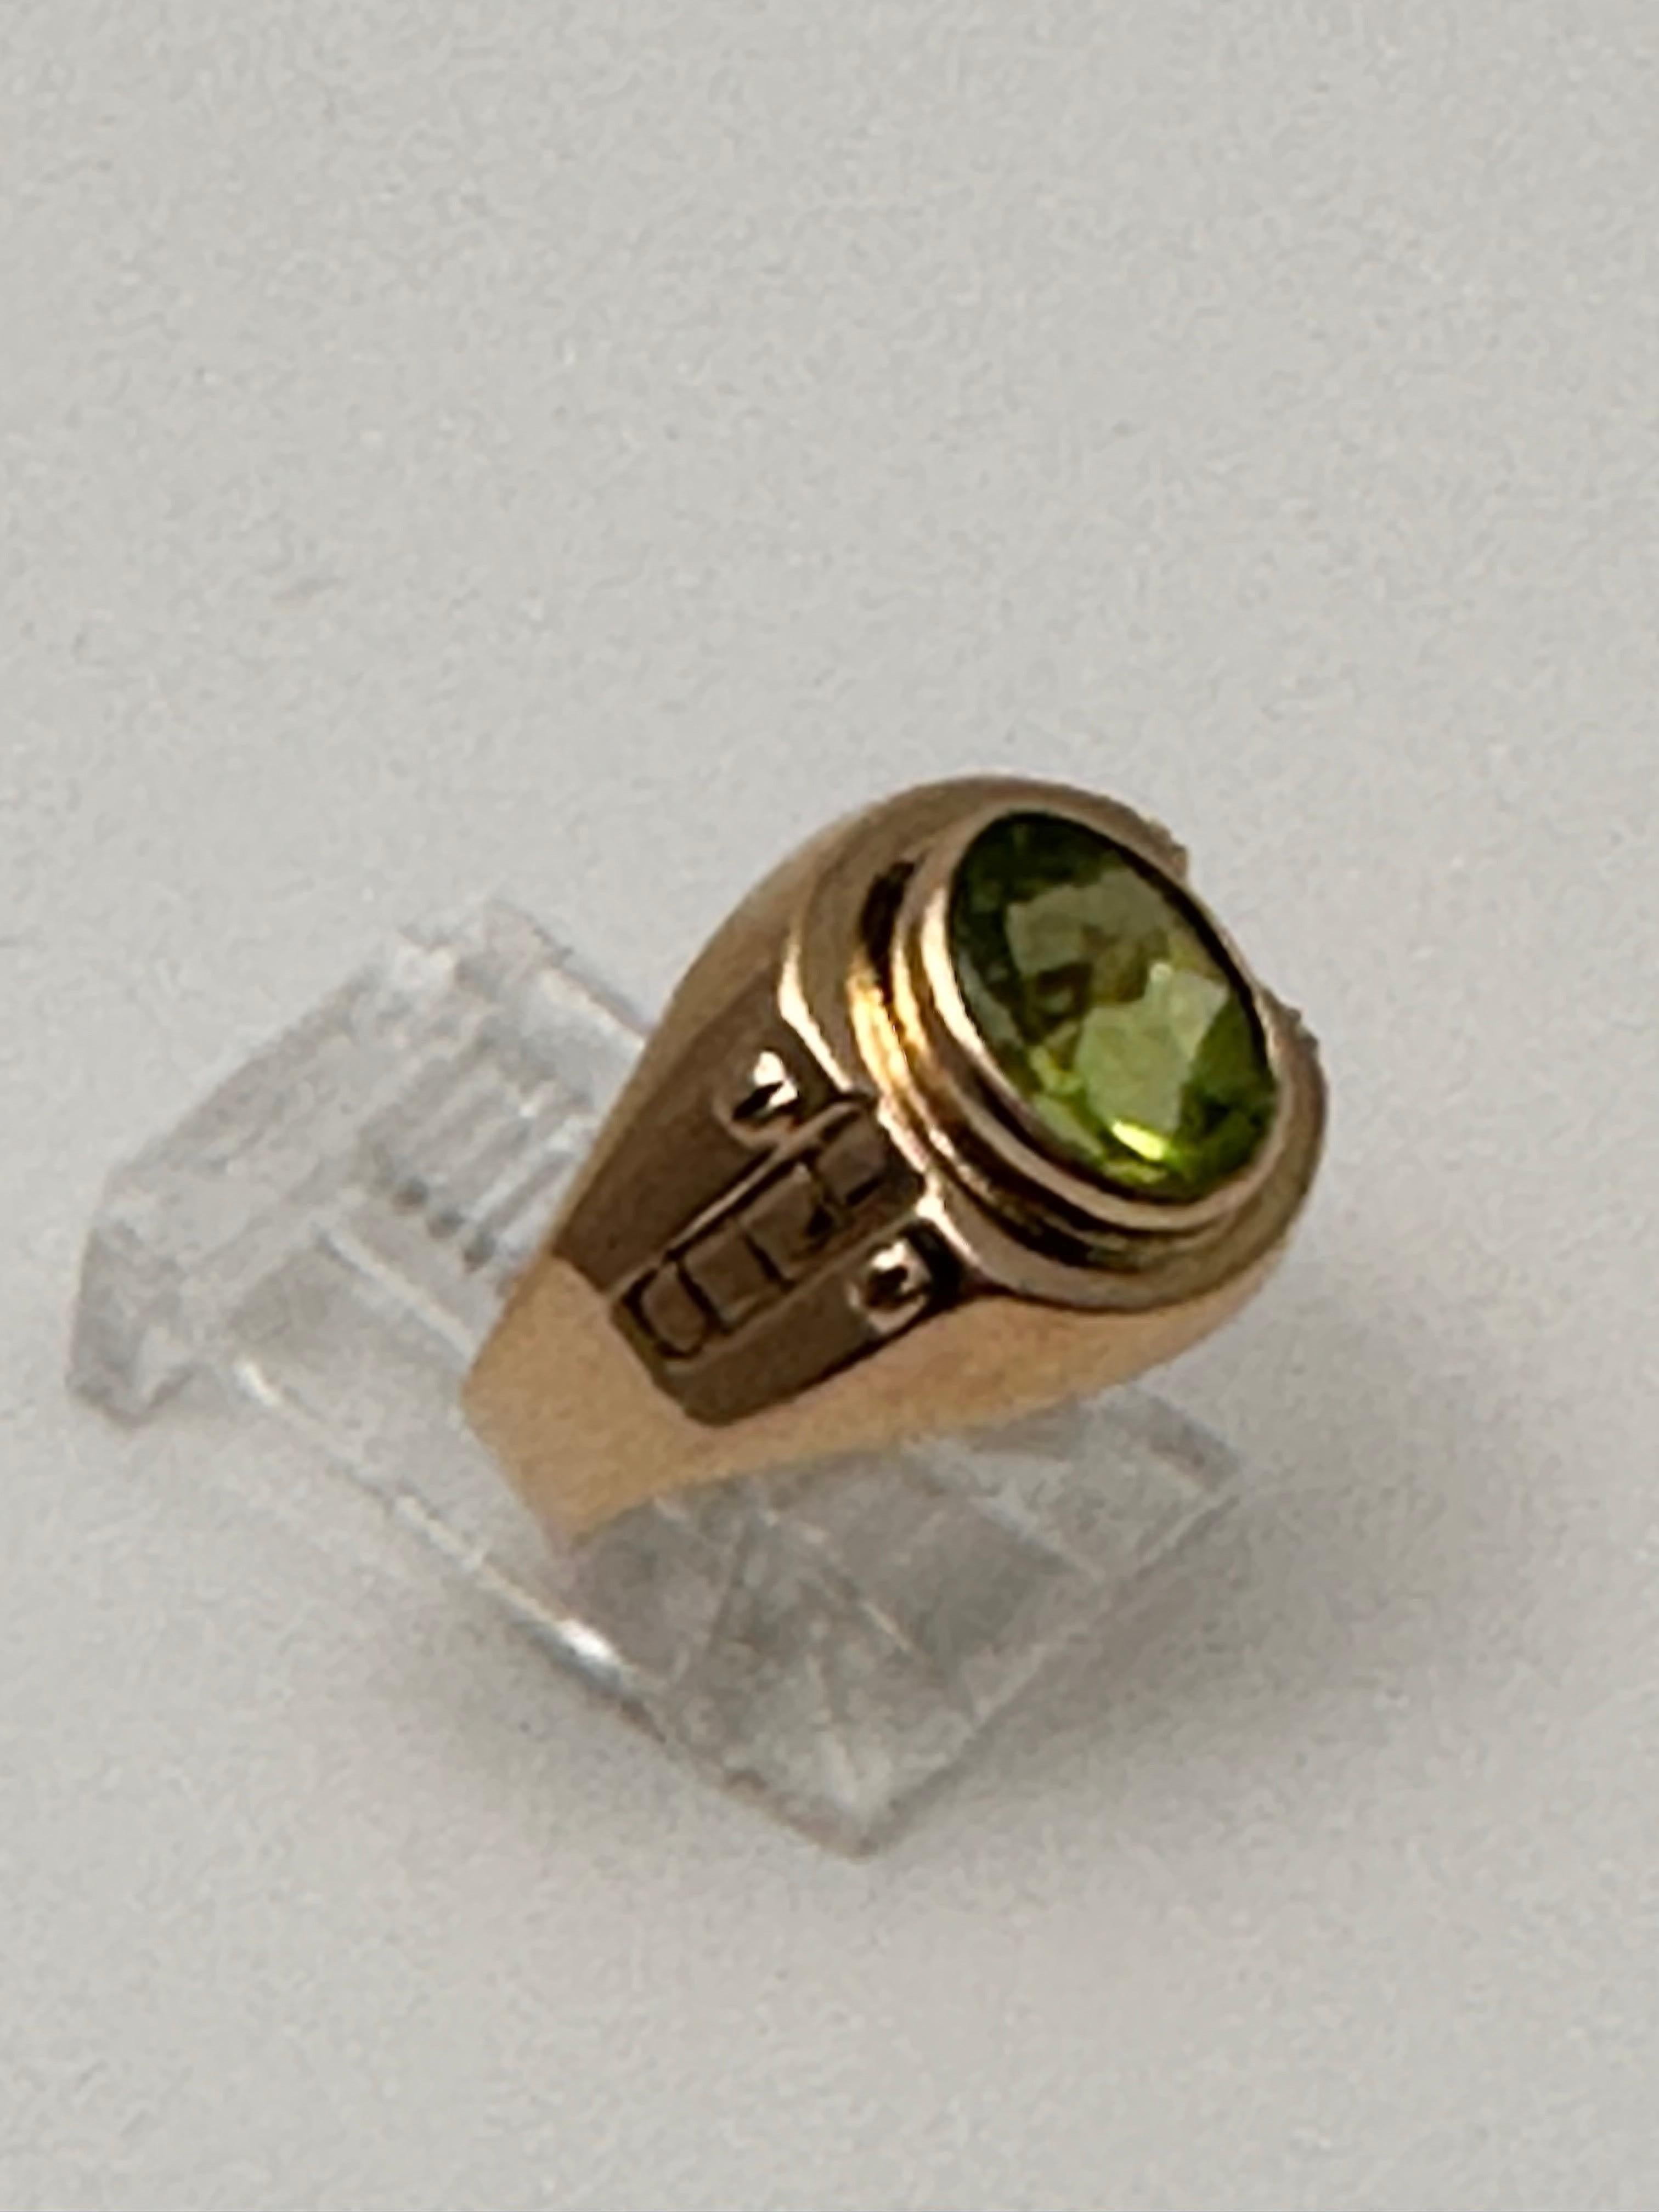 21kt Yellow Gold 8mm x 9mm Oval Peridot Ring Size 5 3/4 For Sale 1